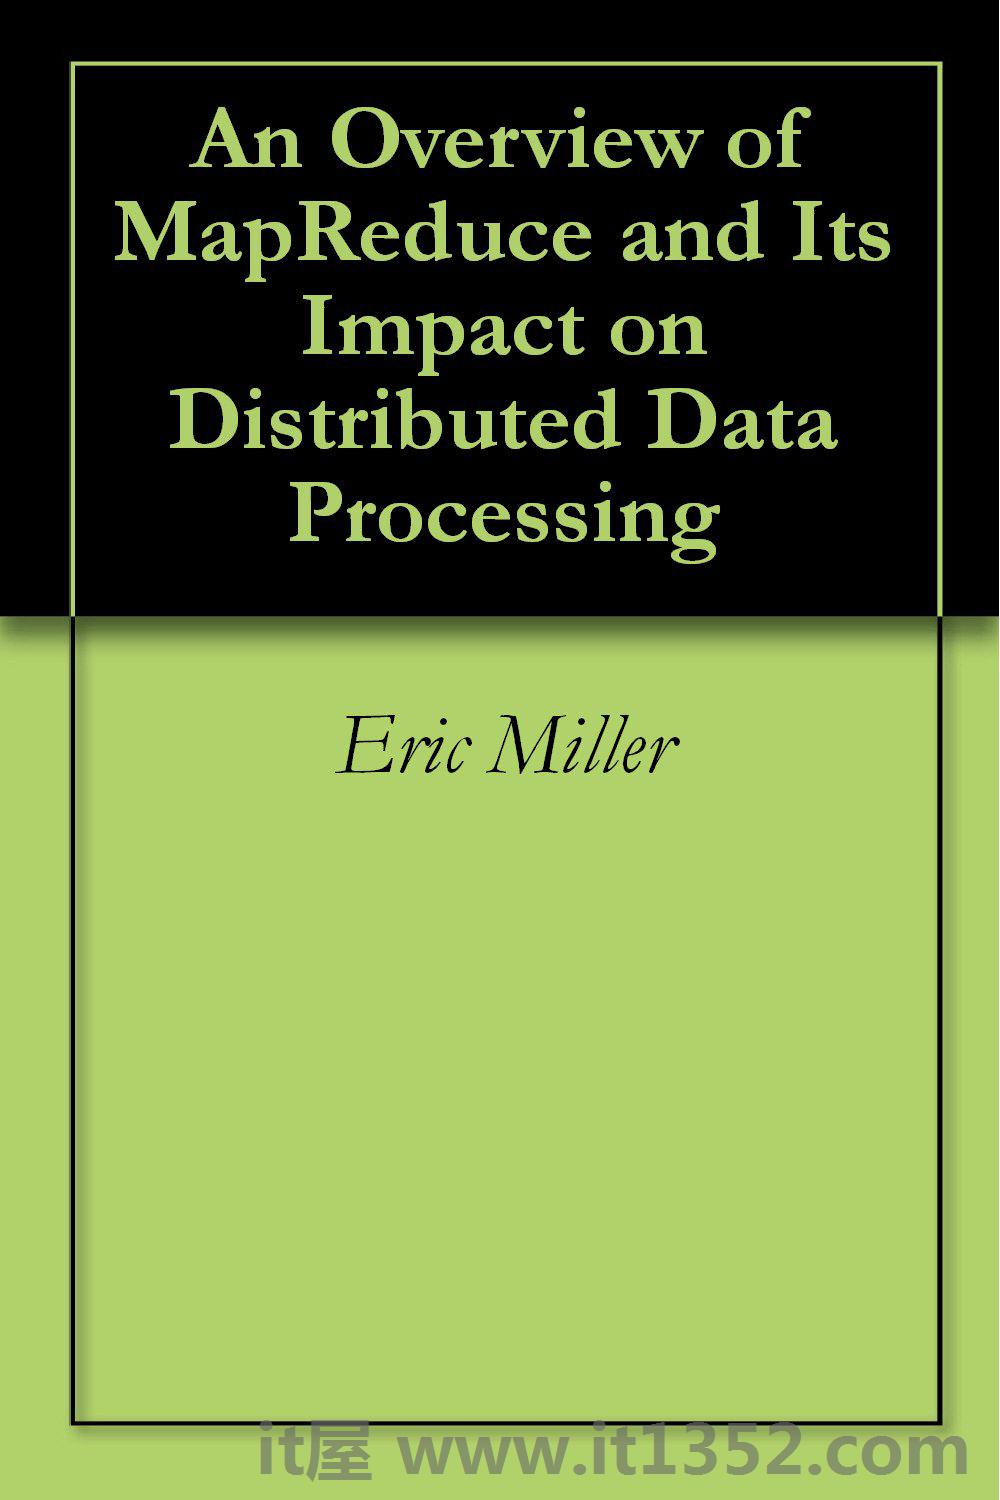 MapReduce <br> Impact Distributed Processing